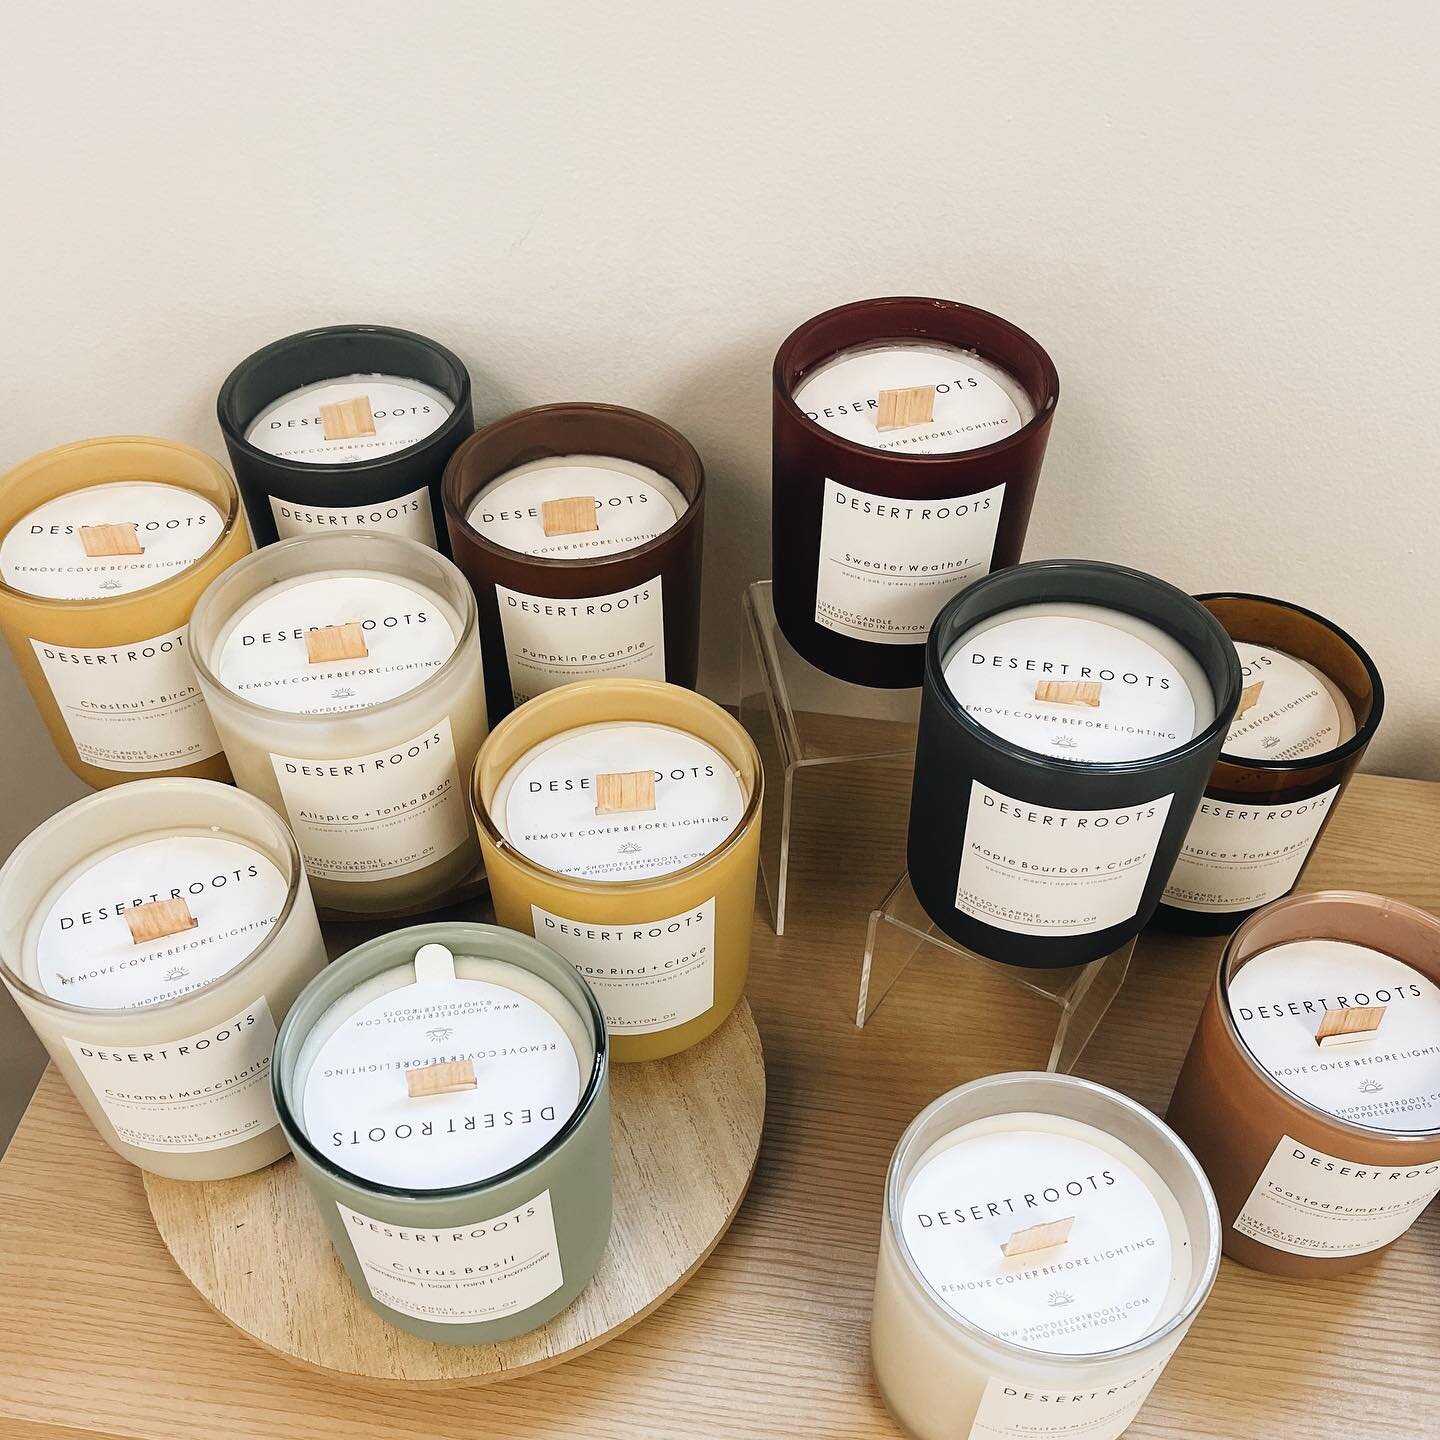 One of each please 😋 do you see the slip up in the pic? 

#fall #fallcandle #falldecor #falloutfits #fallvibes #fallscents #psl #pumpkinspice #pumpkincandle #spooky #spookyseason #handpoured #cleancandles #woodwick